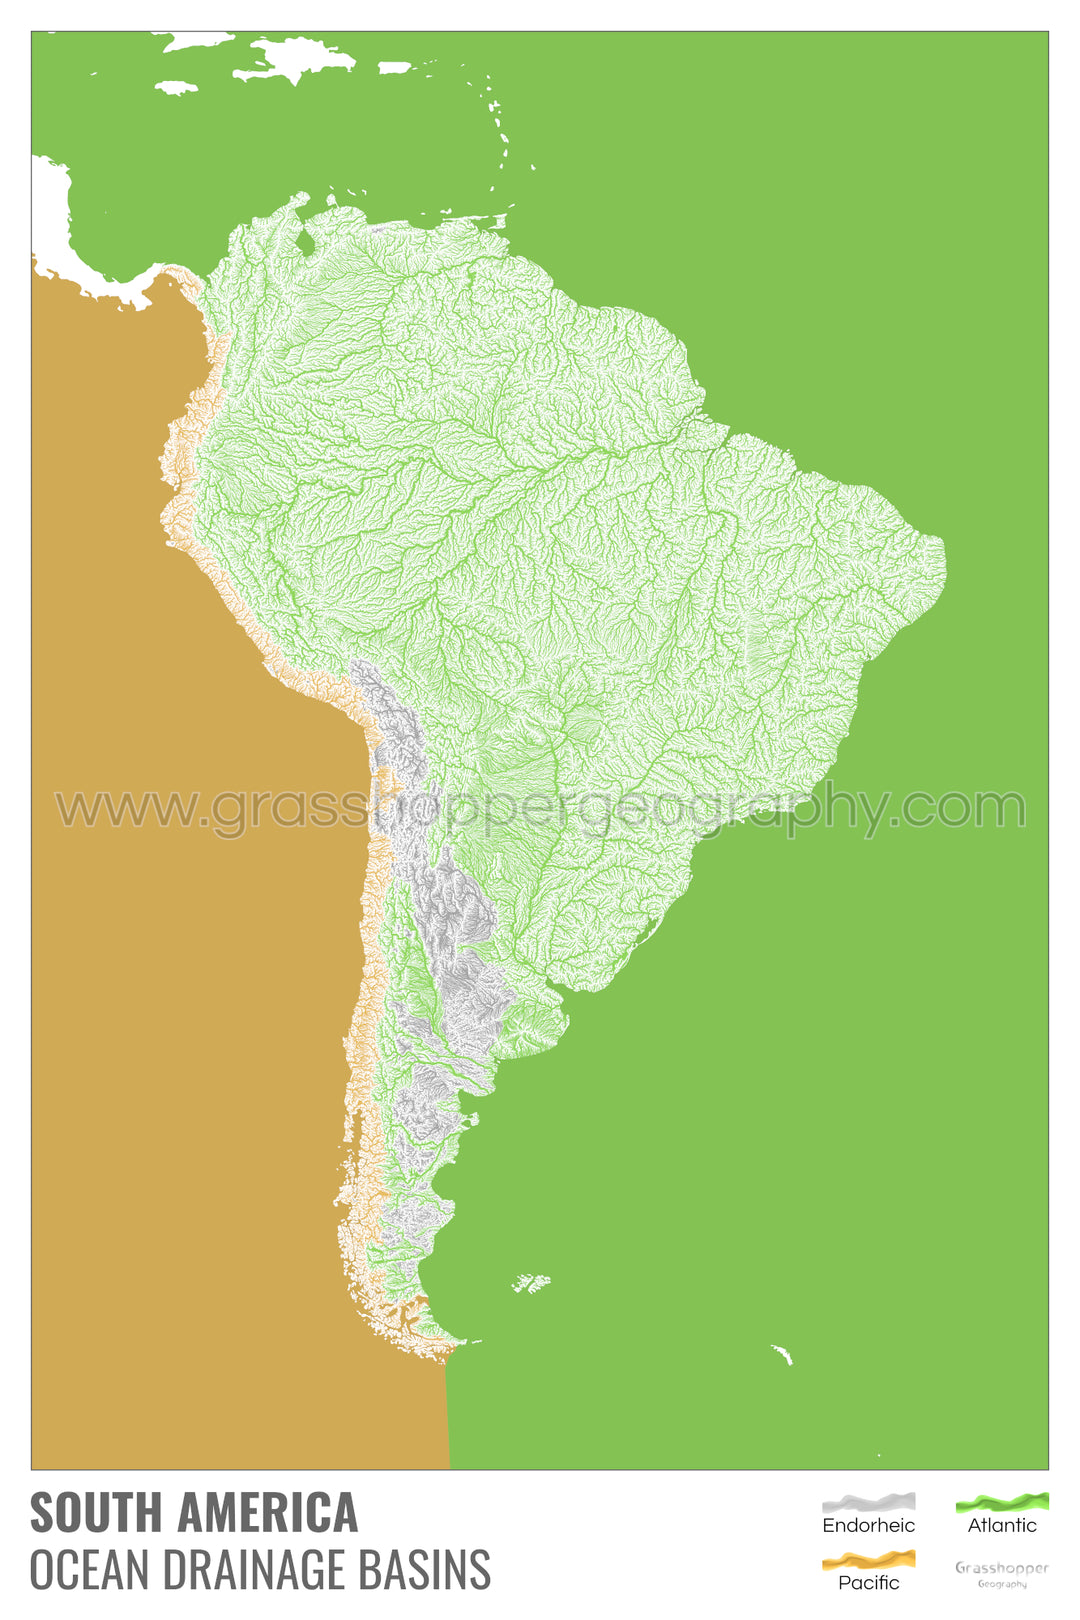 South America - Ocean drainage basin map, white with legend v2 - Photo Art Print